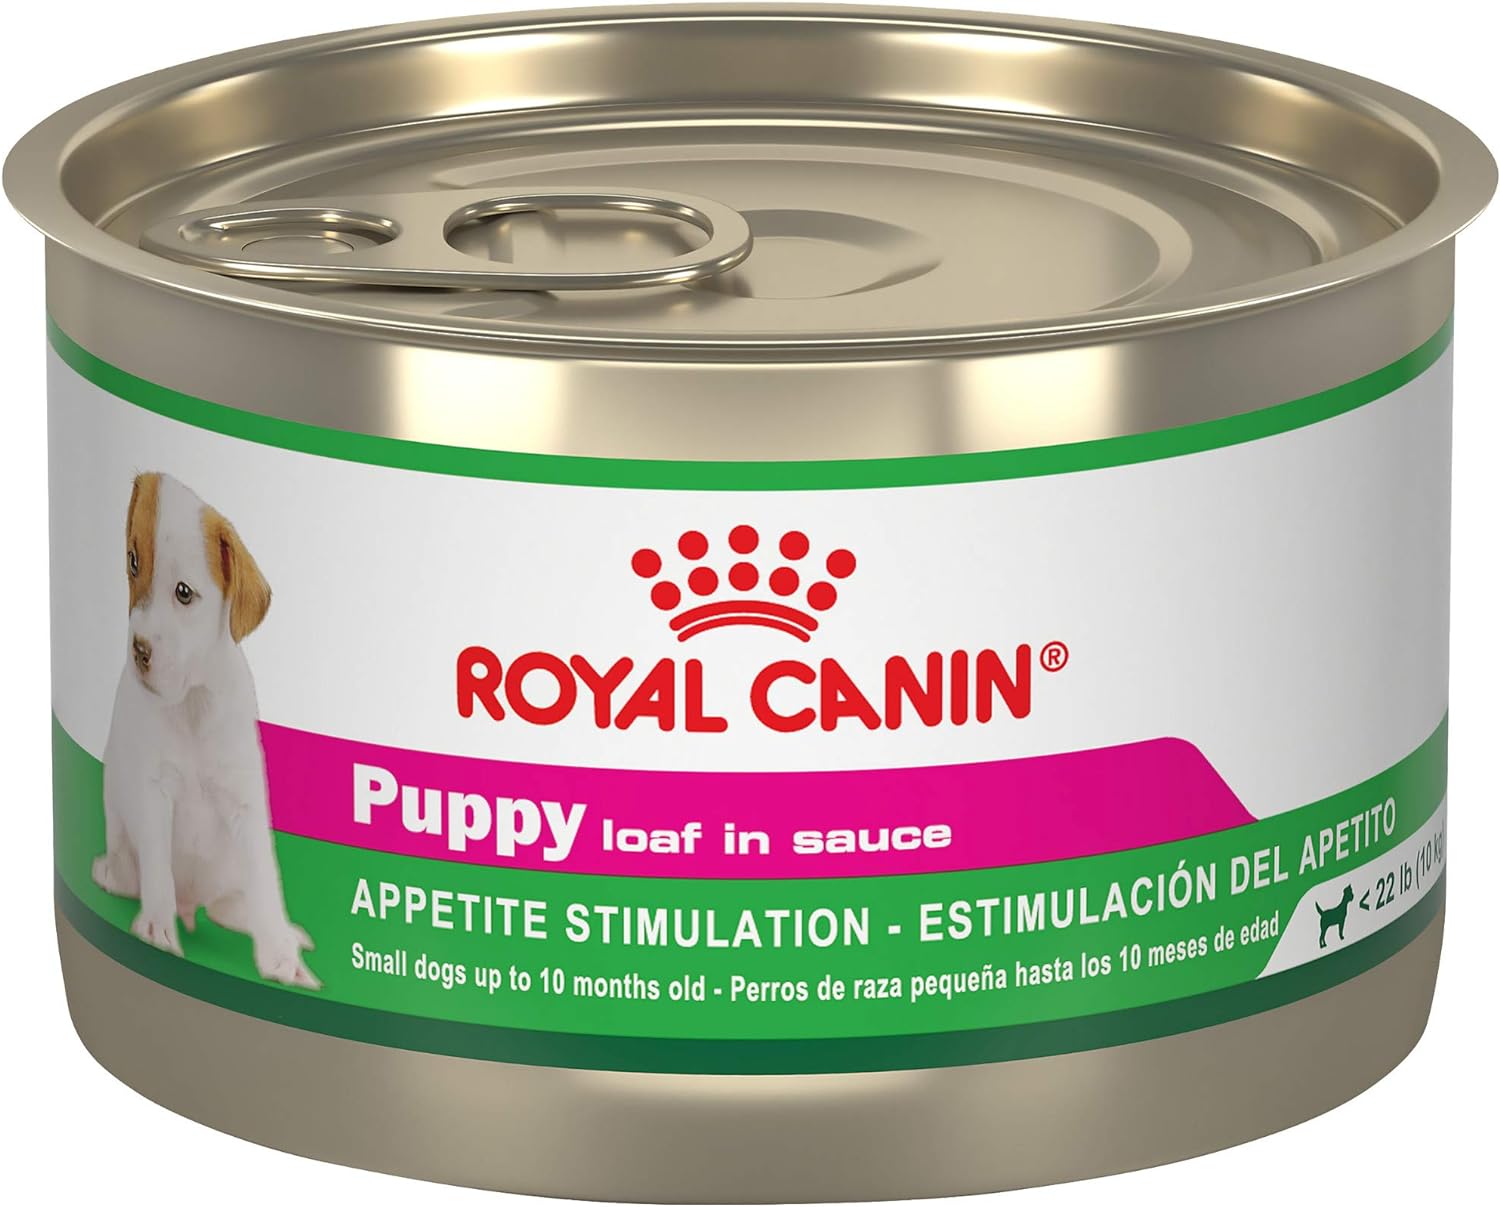 Royal Canin Canine Health Nutrition Puppy Loaf in Sauce Canned Dog Food, 5.2 oz can (24-count)